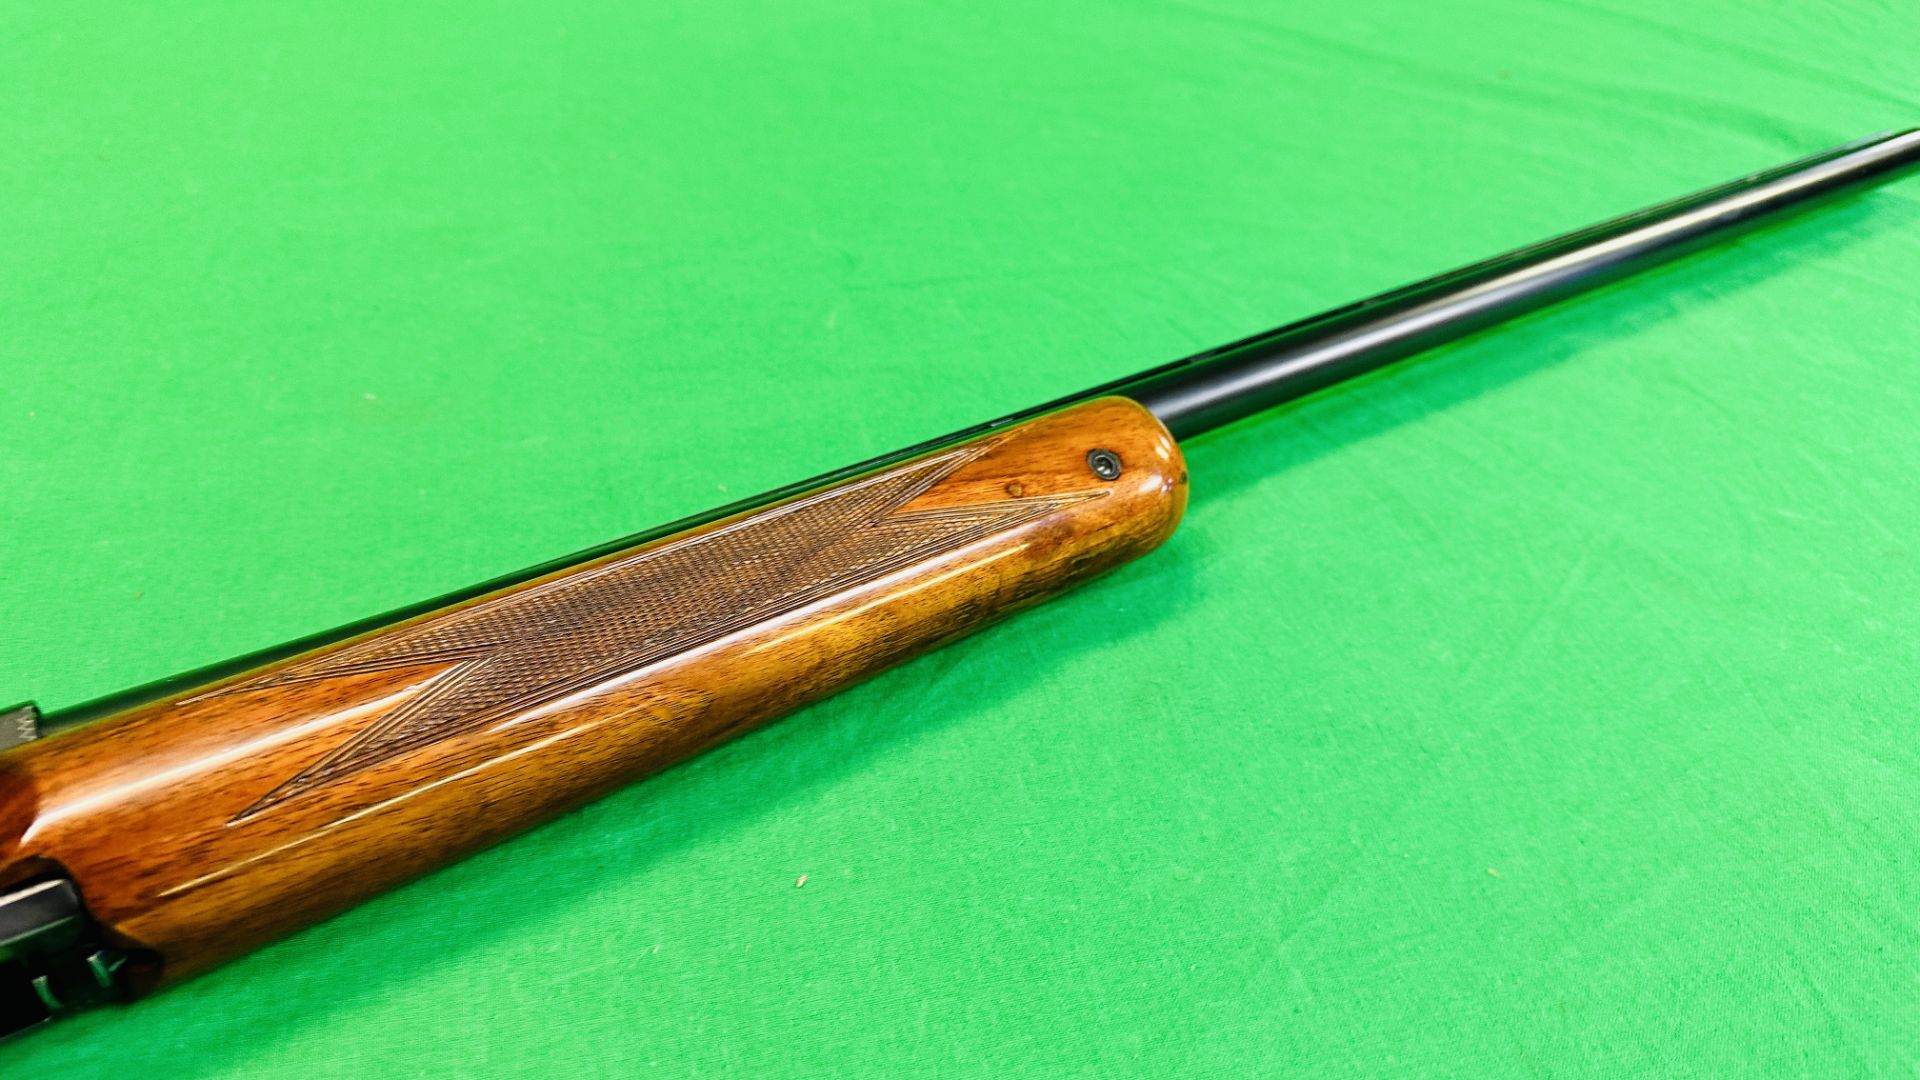 FABRIQUE 12 BORE SELF LOADING TWO SHOT SHOTGUN MODEL "DOUBLE TWO" #C23651 29 INCH BARREL VENTILATED - Image 8 of 15